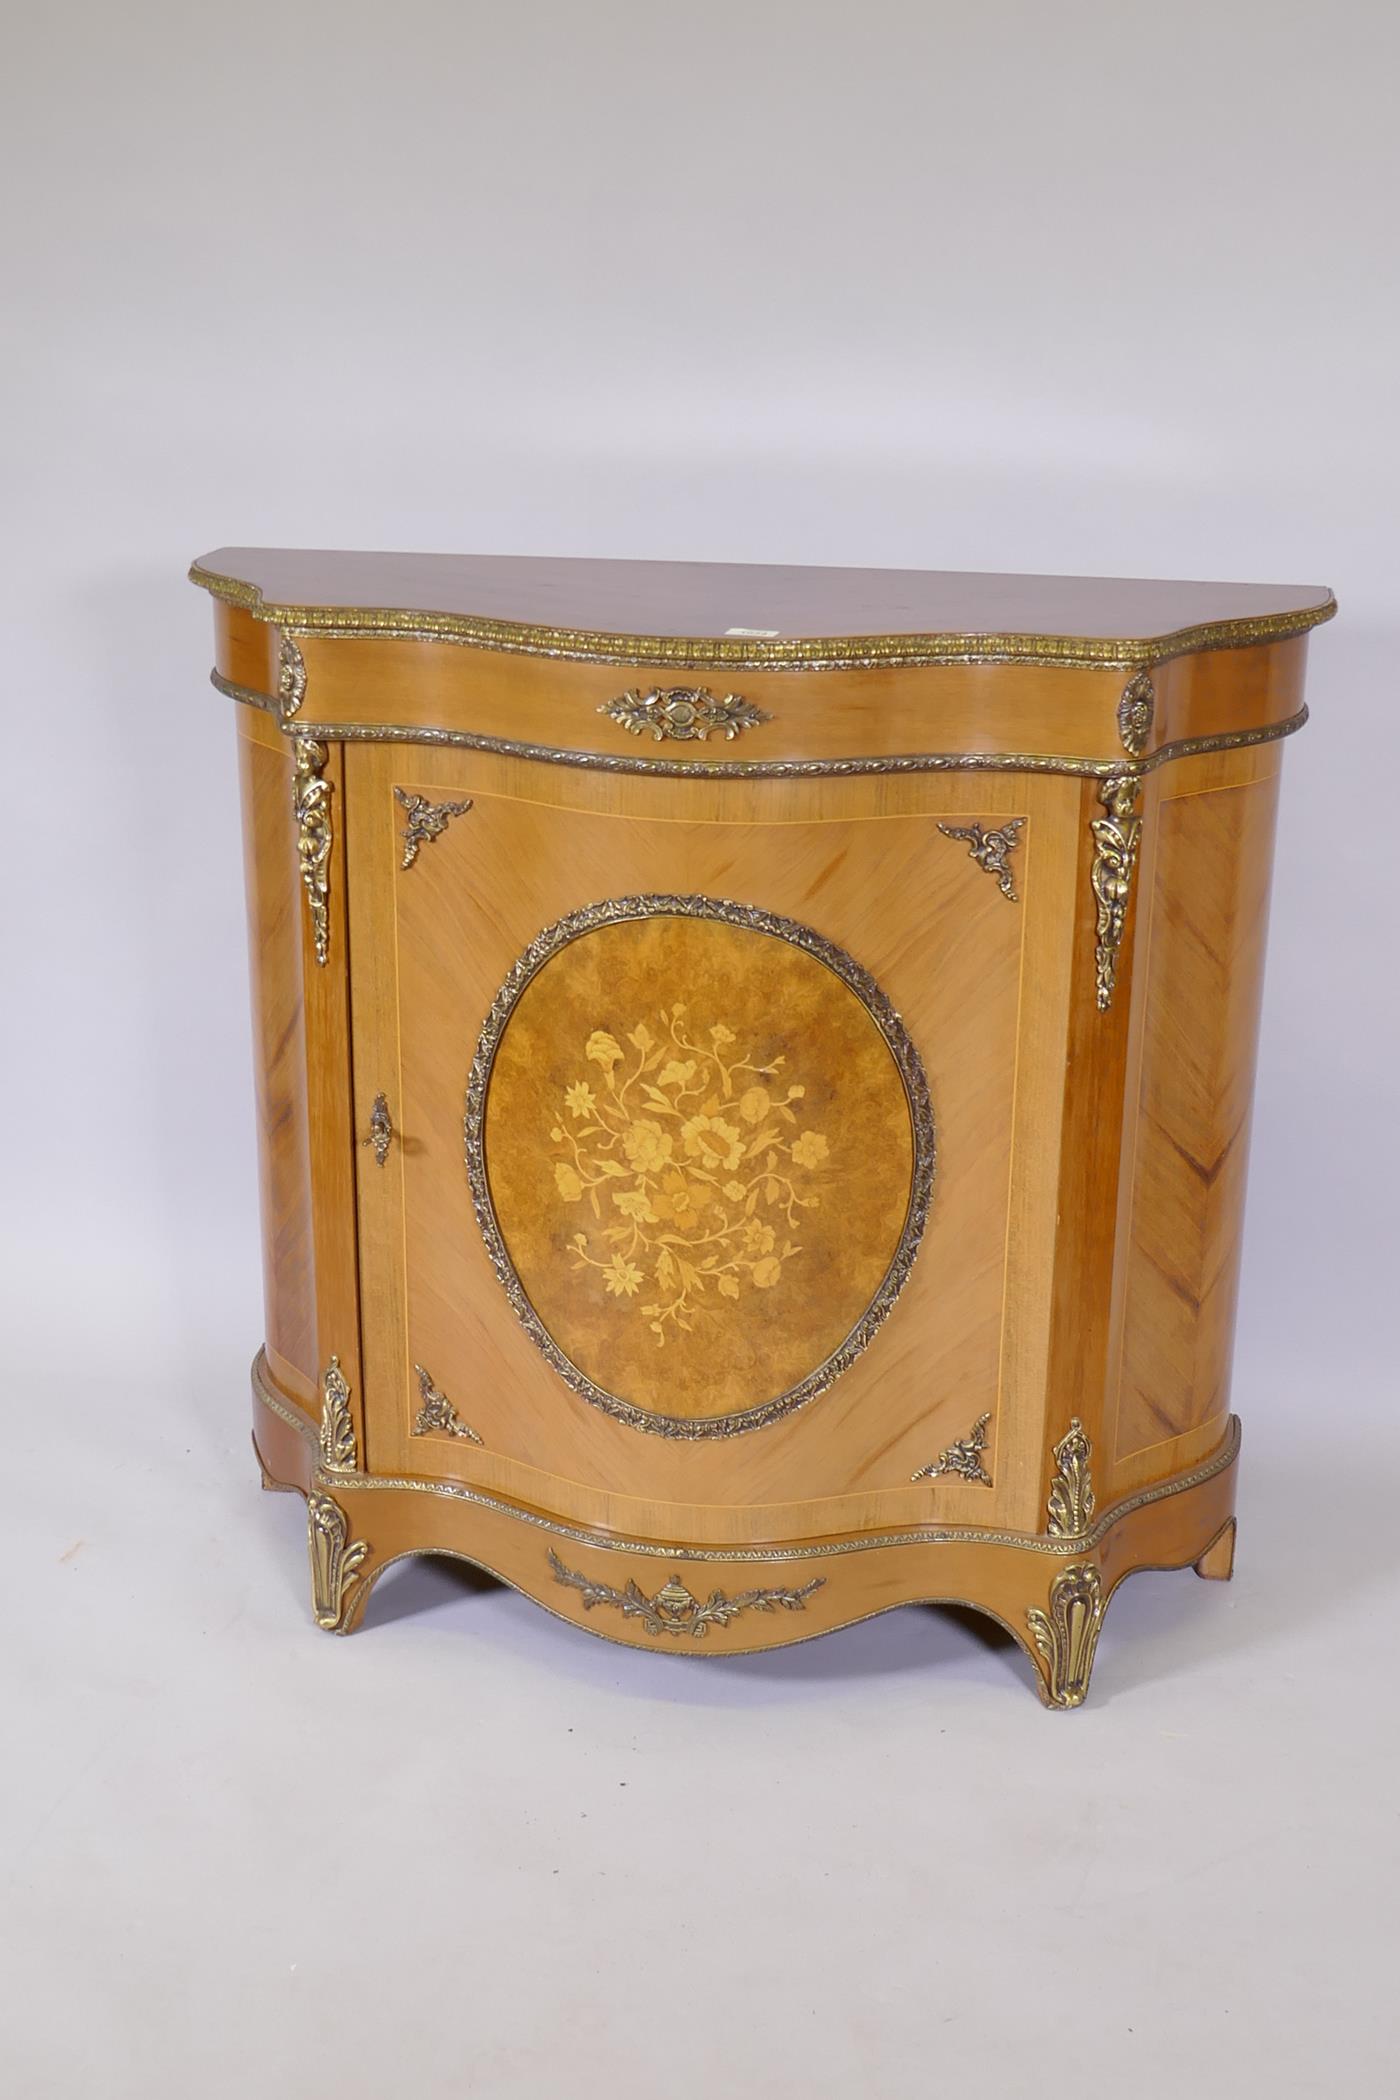 A French style tulipwood serpentine fronted cabinet with marquetry inlaid decoration and brass - Image 3 of 9